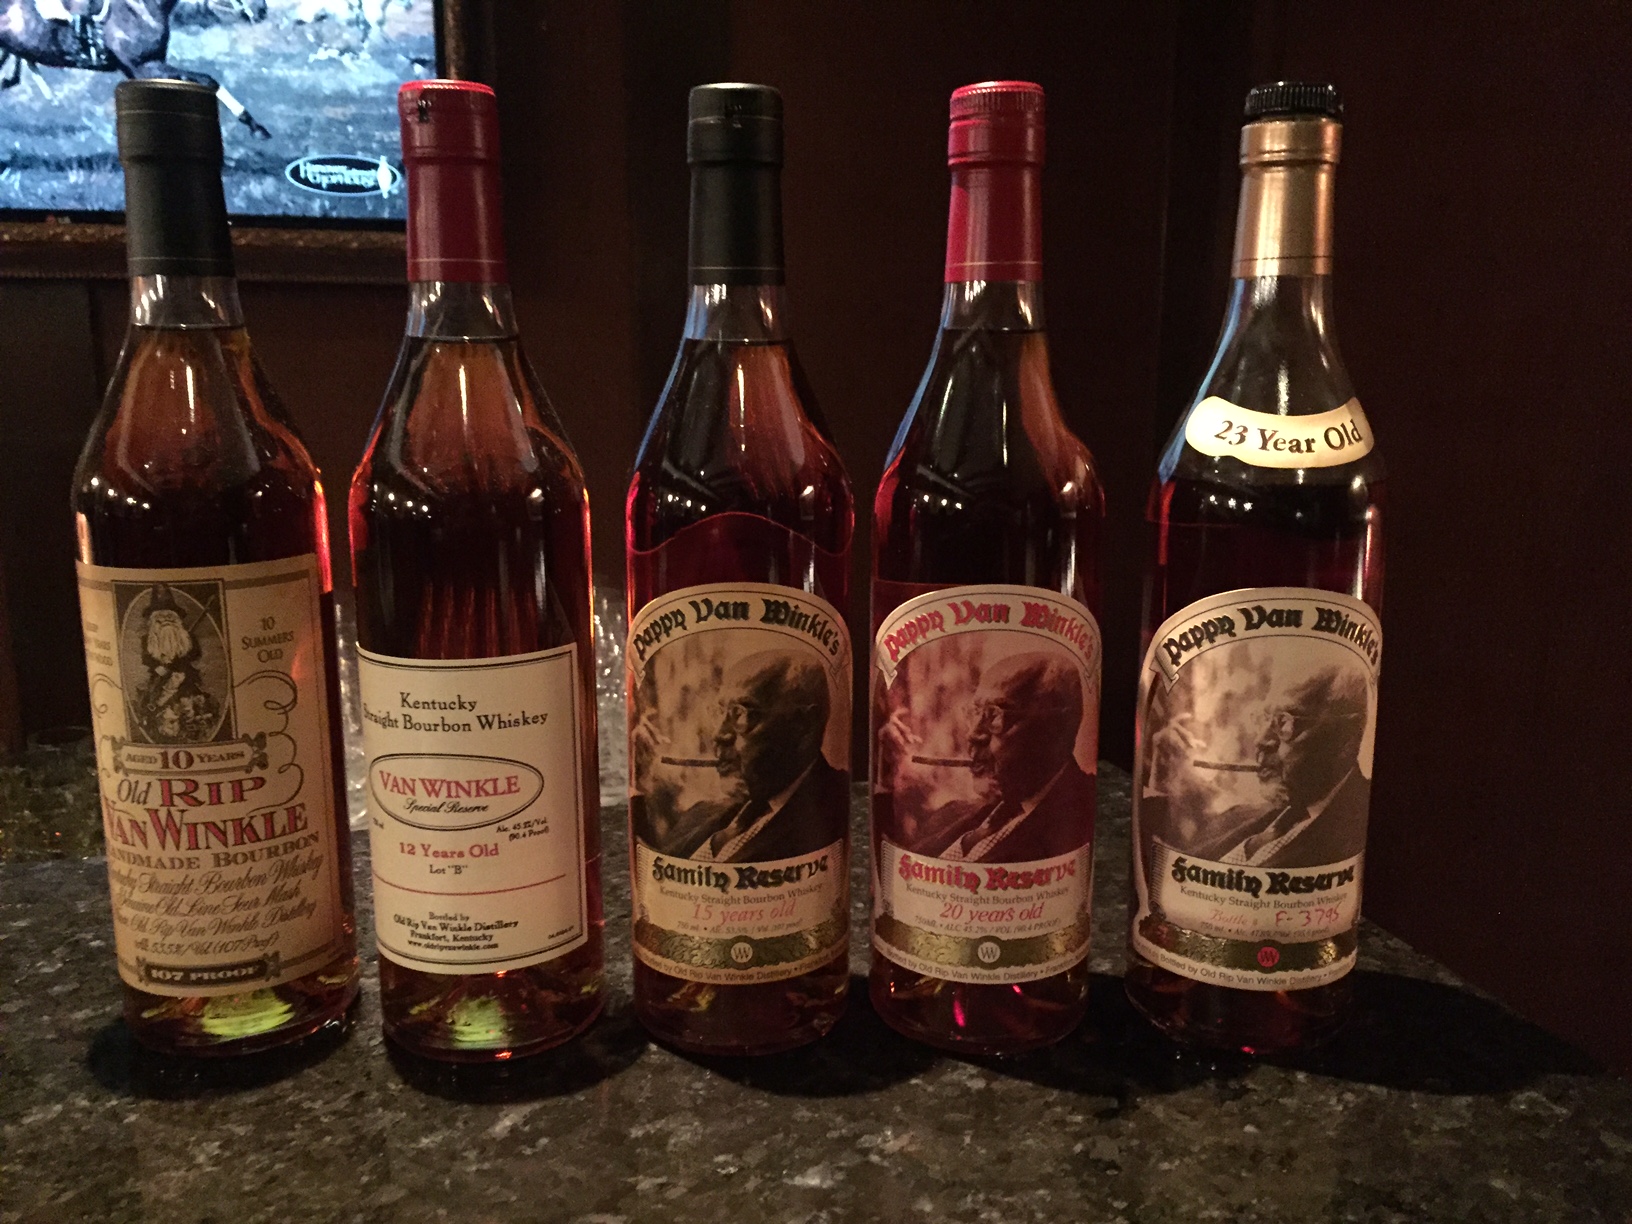 Nh Liquor Commission Launches State S First Raffle Of Pappy Van Winkle S Full Line Of Rare Bourbons The Tasting Room